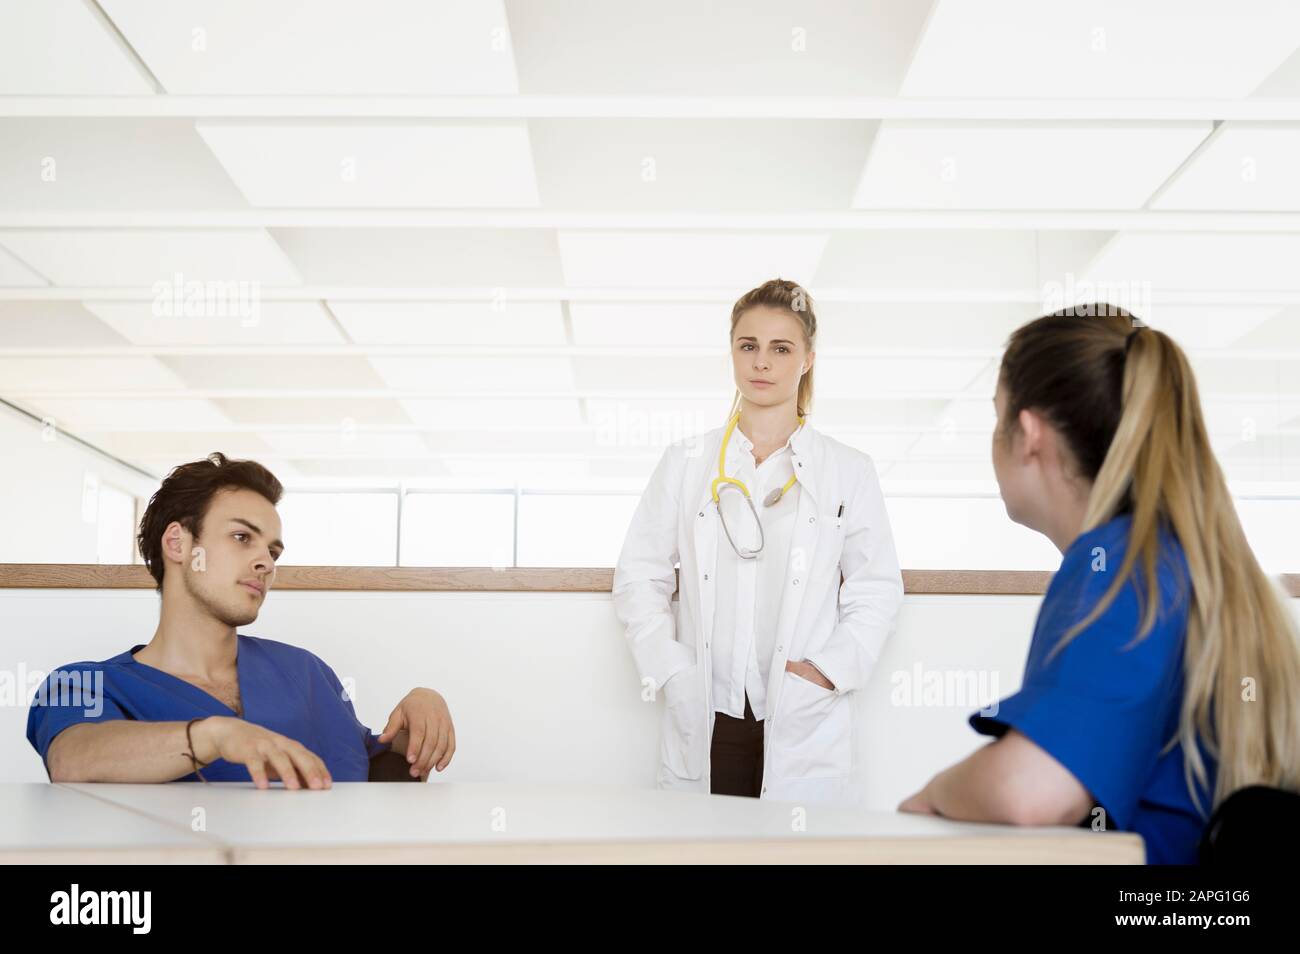 Doctor And Nurses Talking At Corridor In Hospital Stock Photo Alamy